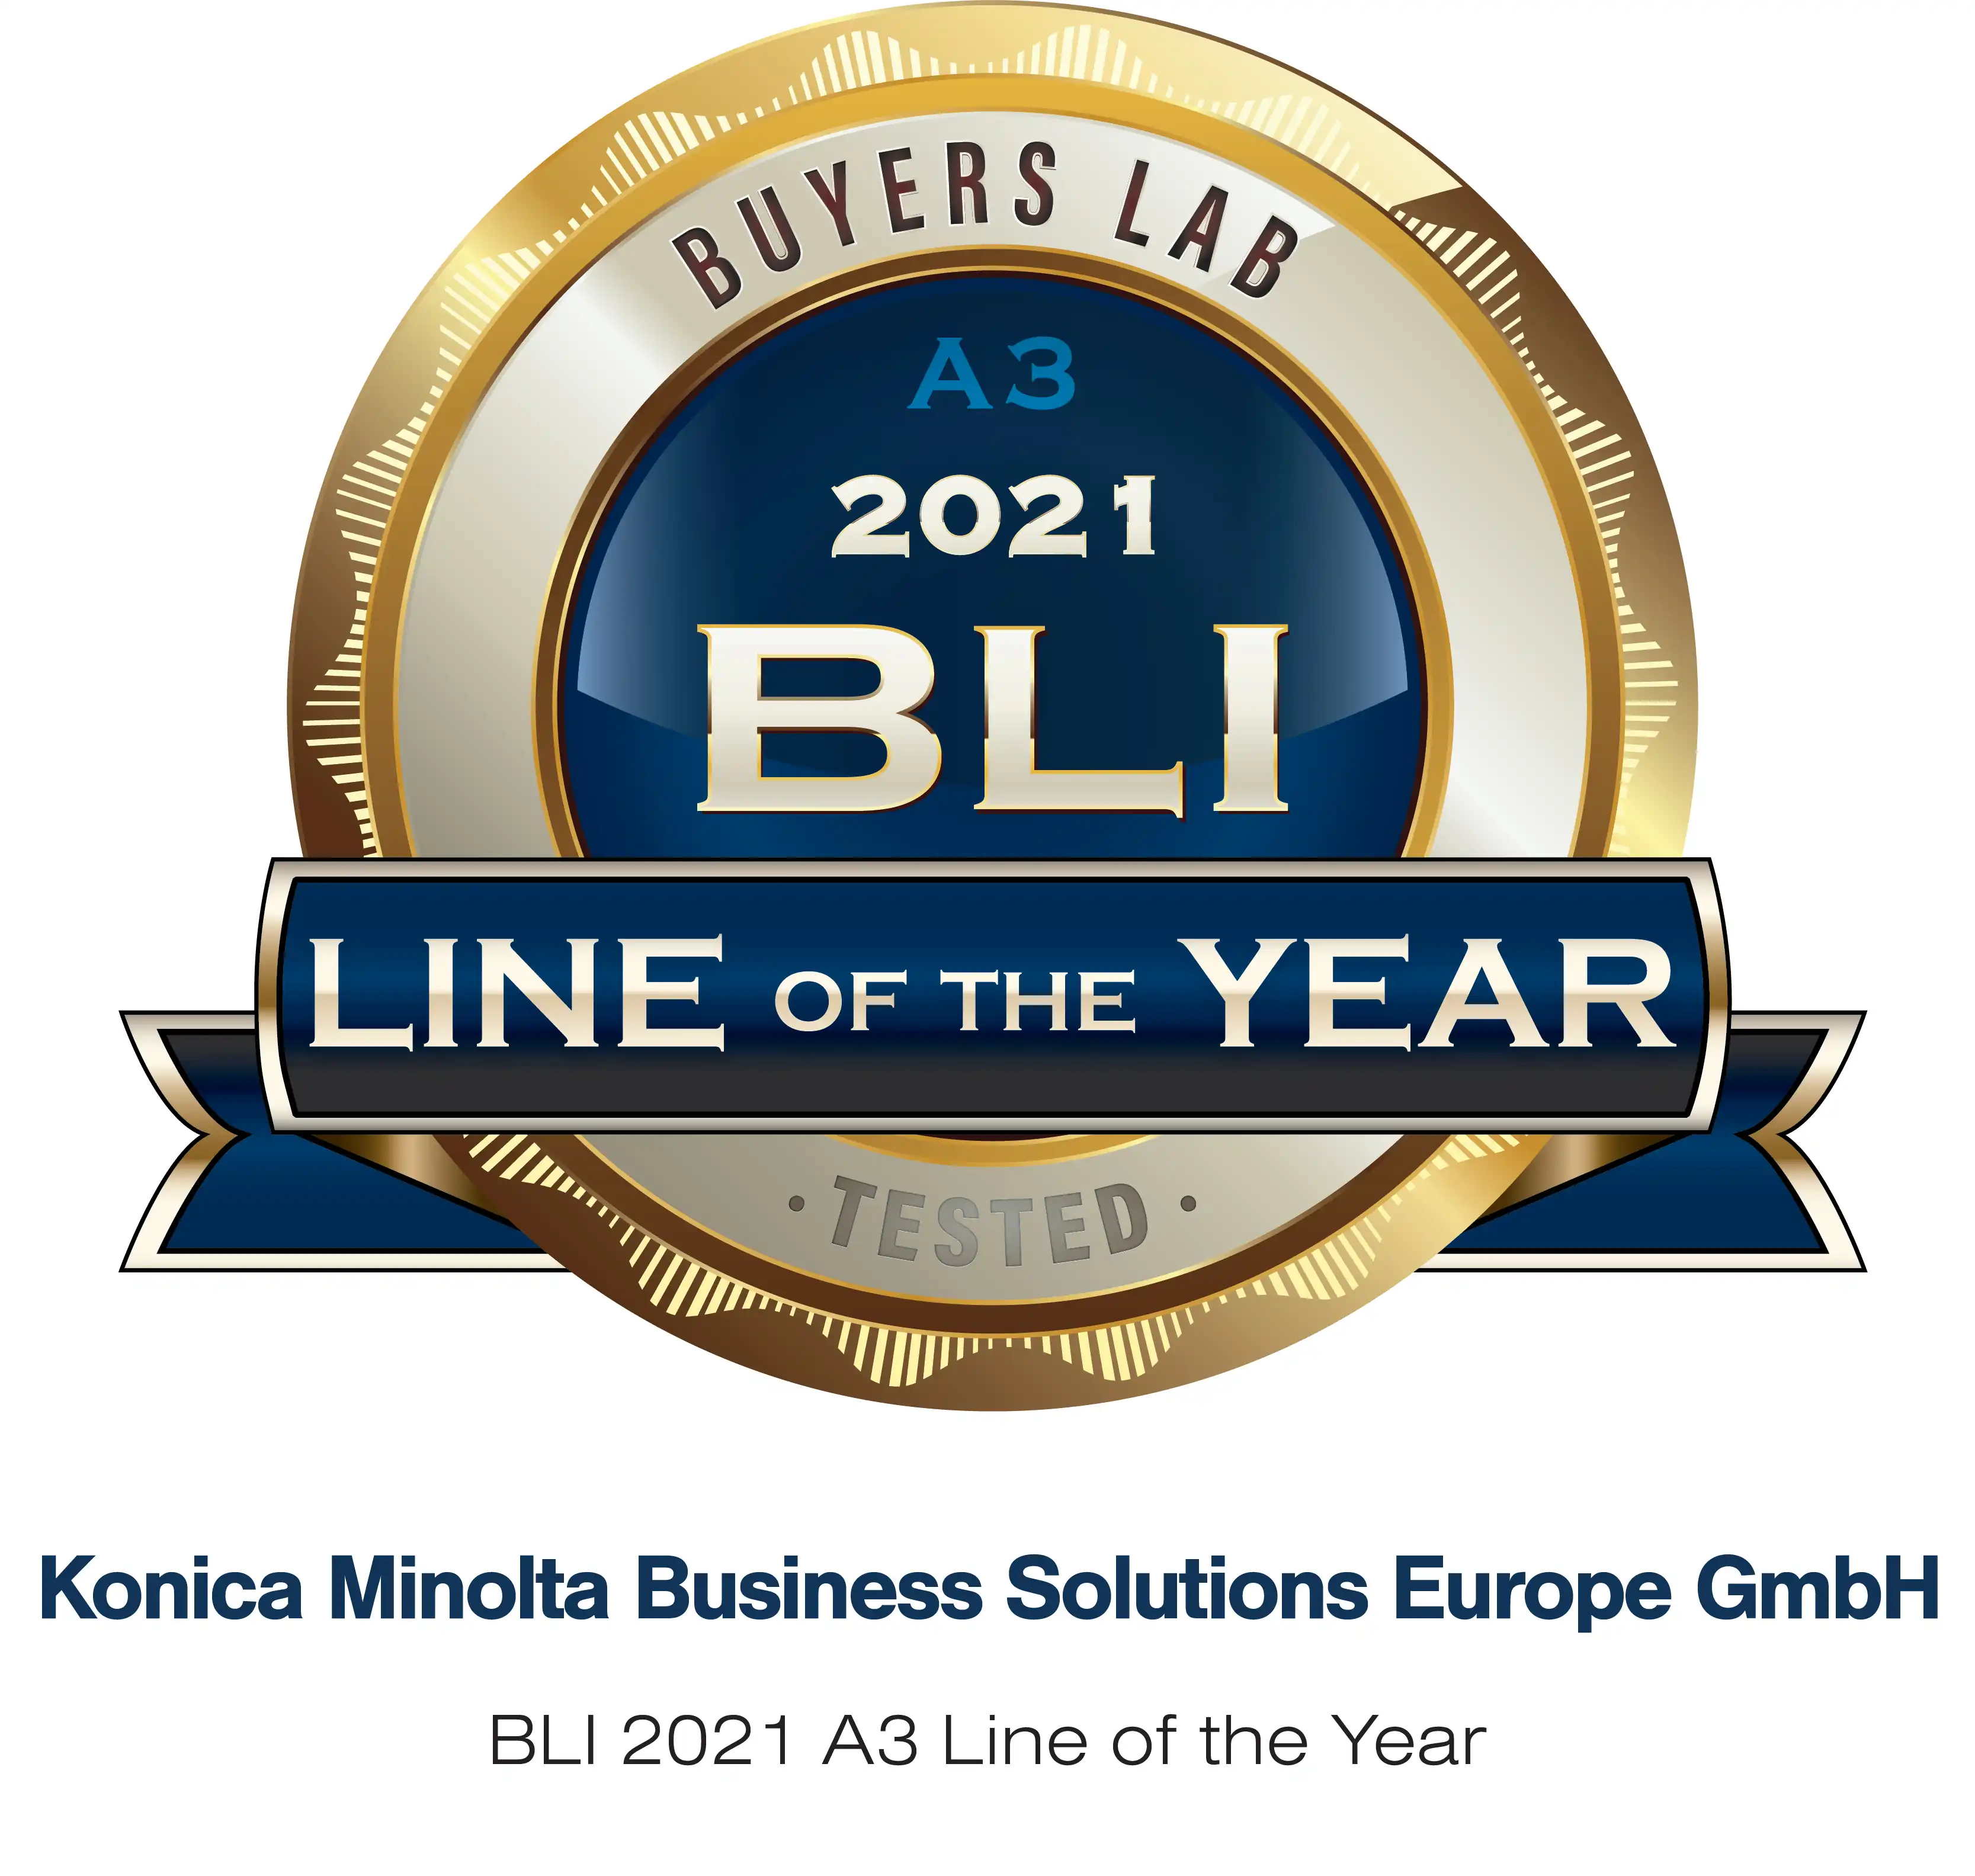  Auhind BLI 2021 A3 Line of the Year